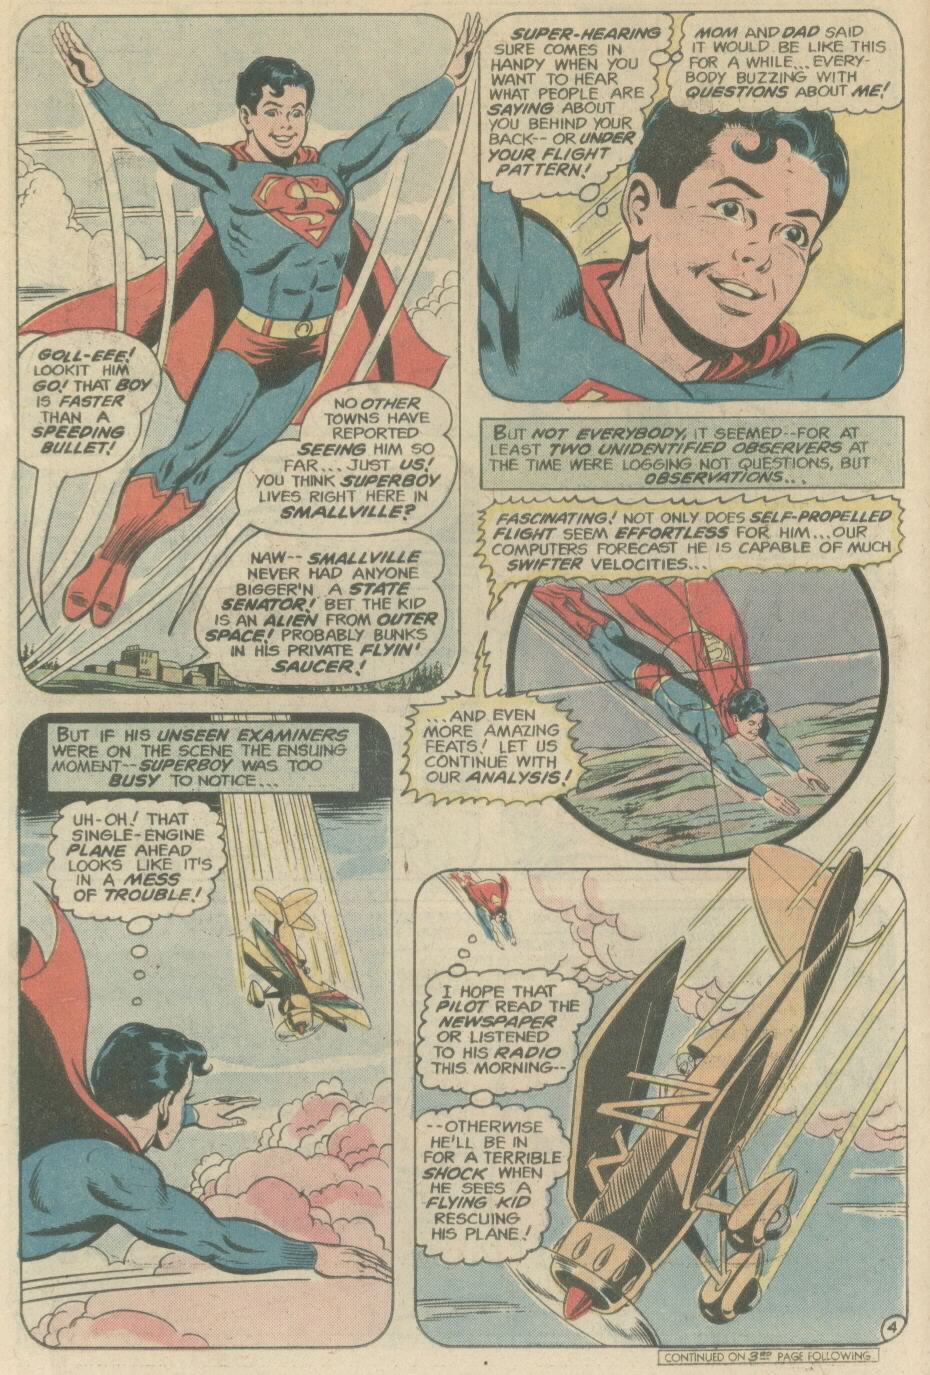 The New Adventures of Superboy 1 Page 4